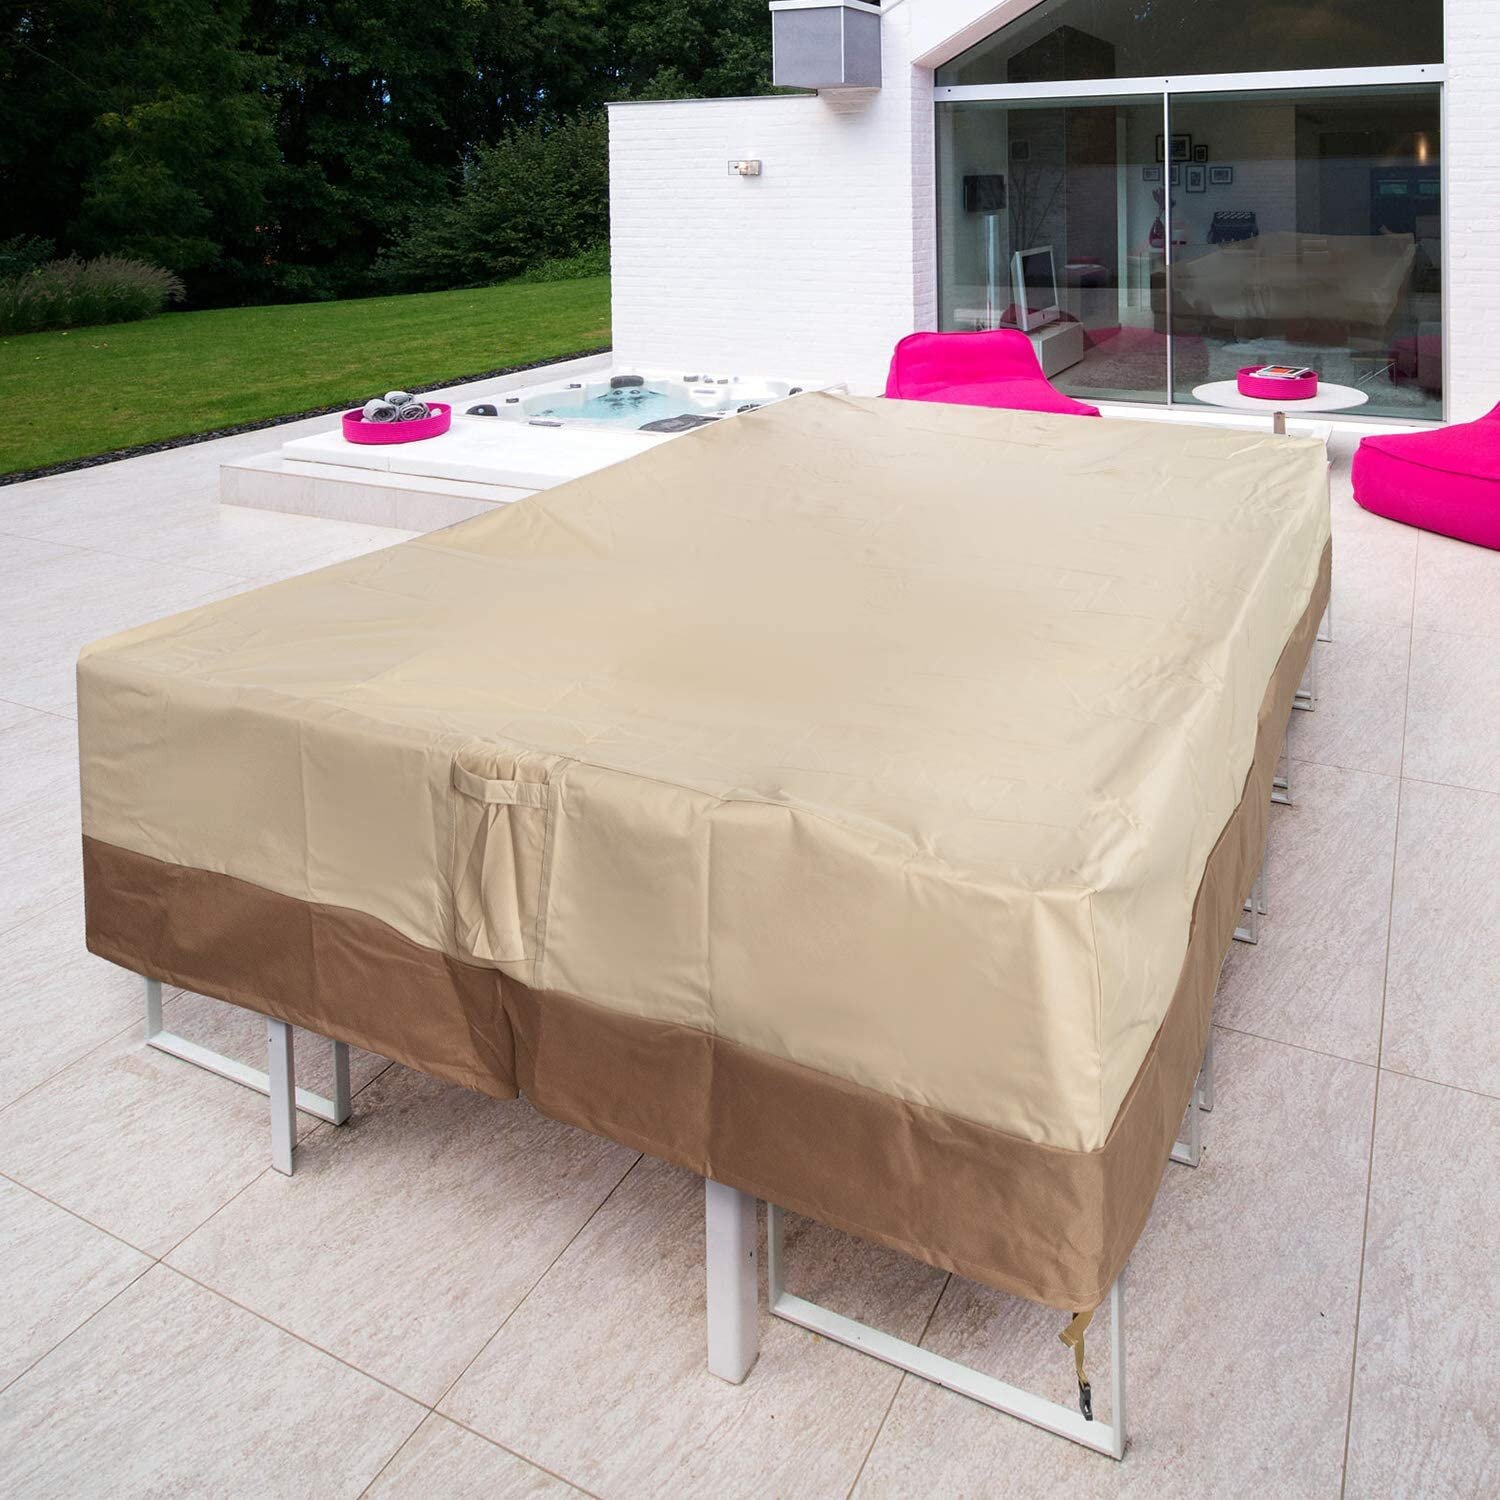 Beige & Brown Patio Furniture Set Covers Outdoor 100% Waterproof 600D Oxford Polyester Durable Heavy Covers Suitable for Large Patio Sectional Sofa Size 125” x 70” x 30”